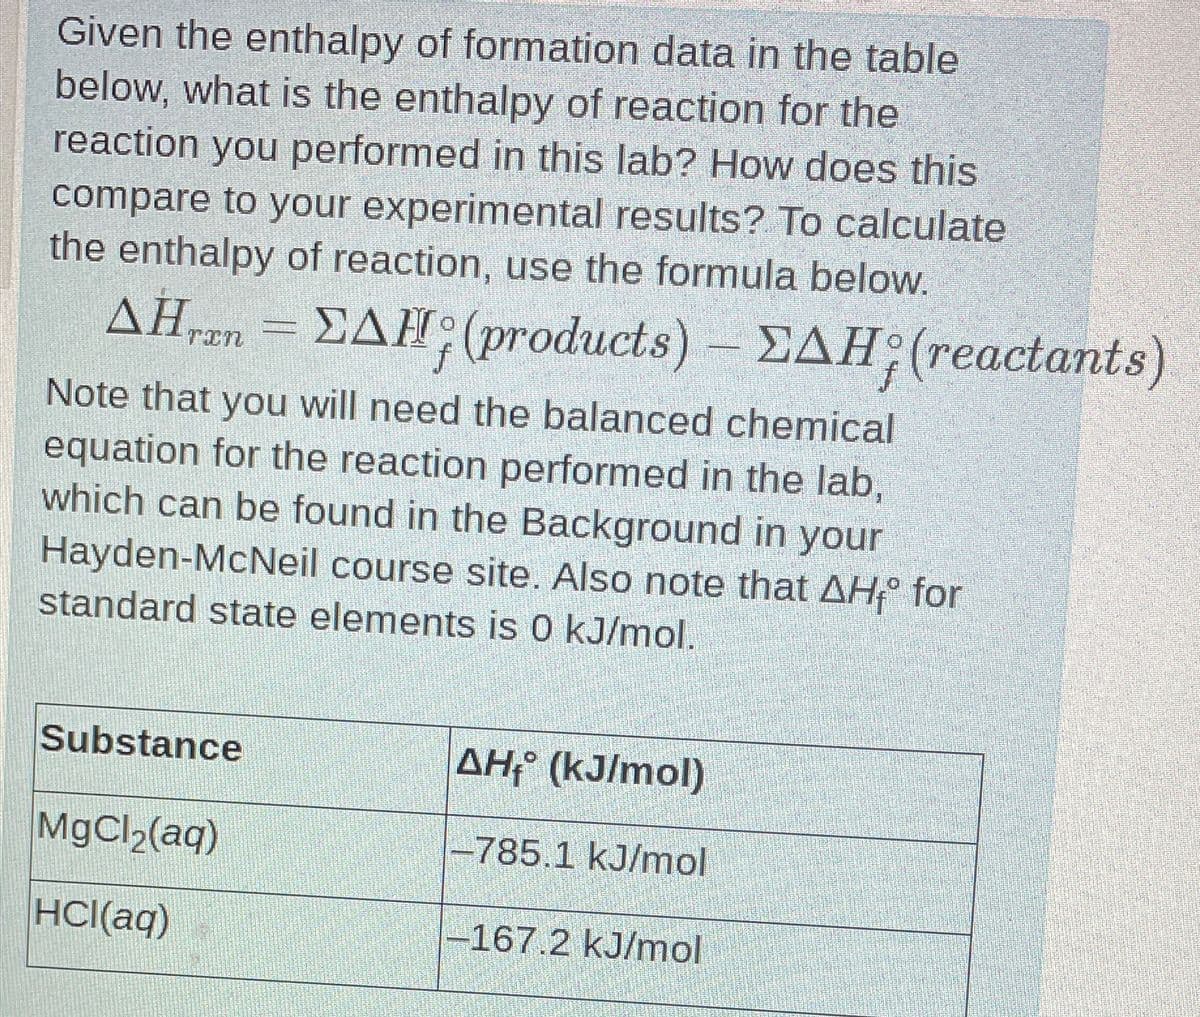 Given the enthalpy of formation data in the table
below, what is the enthalpy of reaction for the
reaction you performed in this lab? How does this
compare to your experimental results? To calculate
the enthalpy of reaction, use the formula below.
AHran=EAH; (products) - EAH; (reactants)
ΔΗ,
Note that you will need the balanced chemical
equation for the reaction performed in the lab,
which can be found in the Background in your
Hayden-McNeil course site. Also note that AHⓇ for
standard state elements is 0 kJ/mol.
Substance
AH₁ (kJ/mol)
MgCl₂(aq)
-785.1 kJ/mol
HCl(aq)
-167.2 kJ/mol